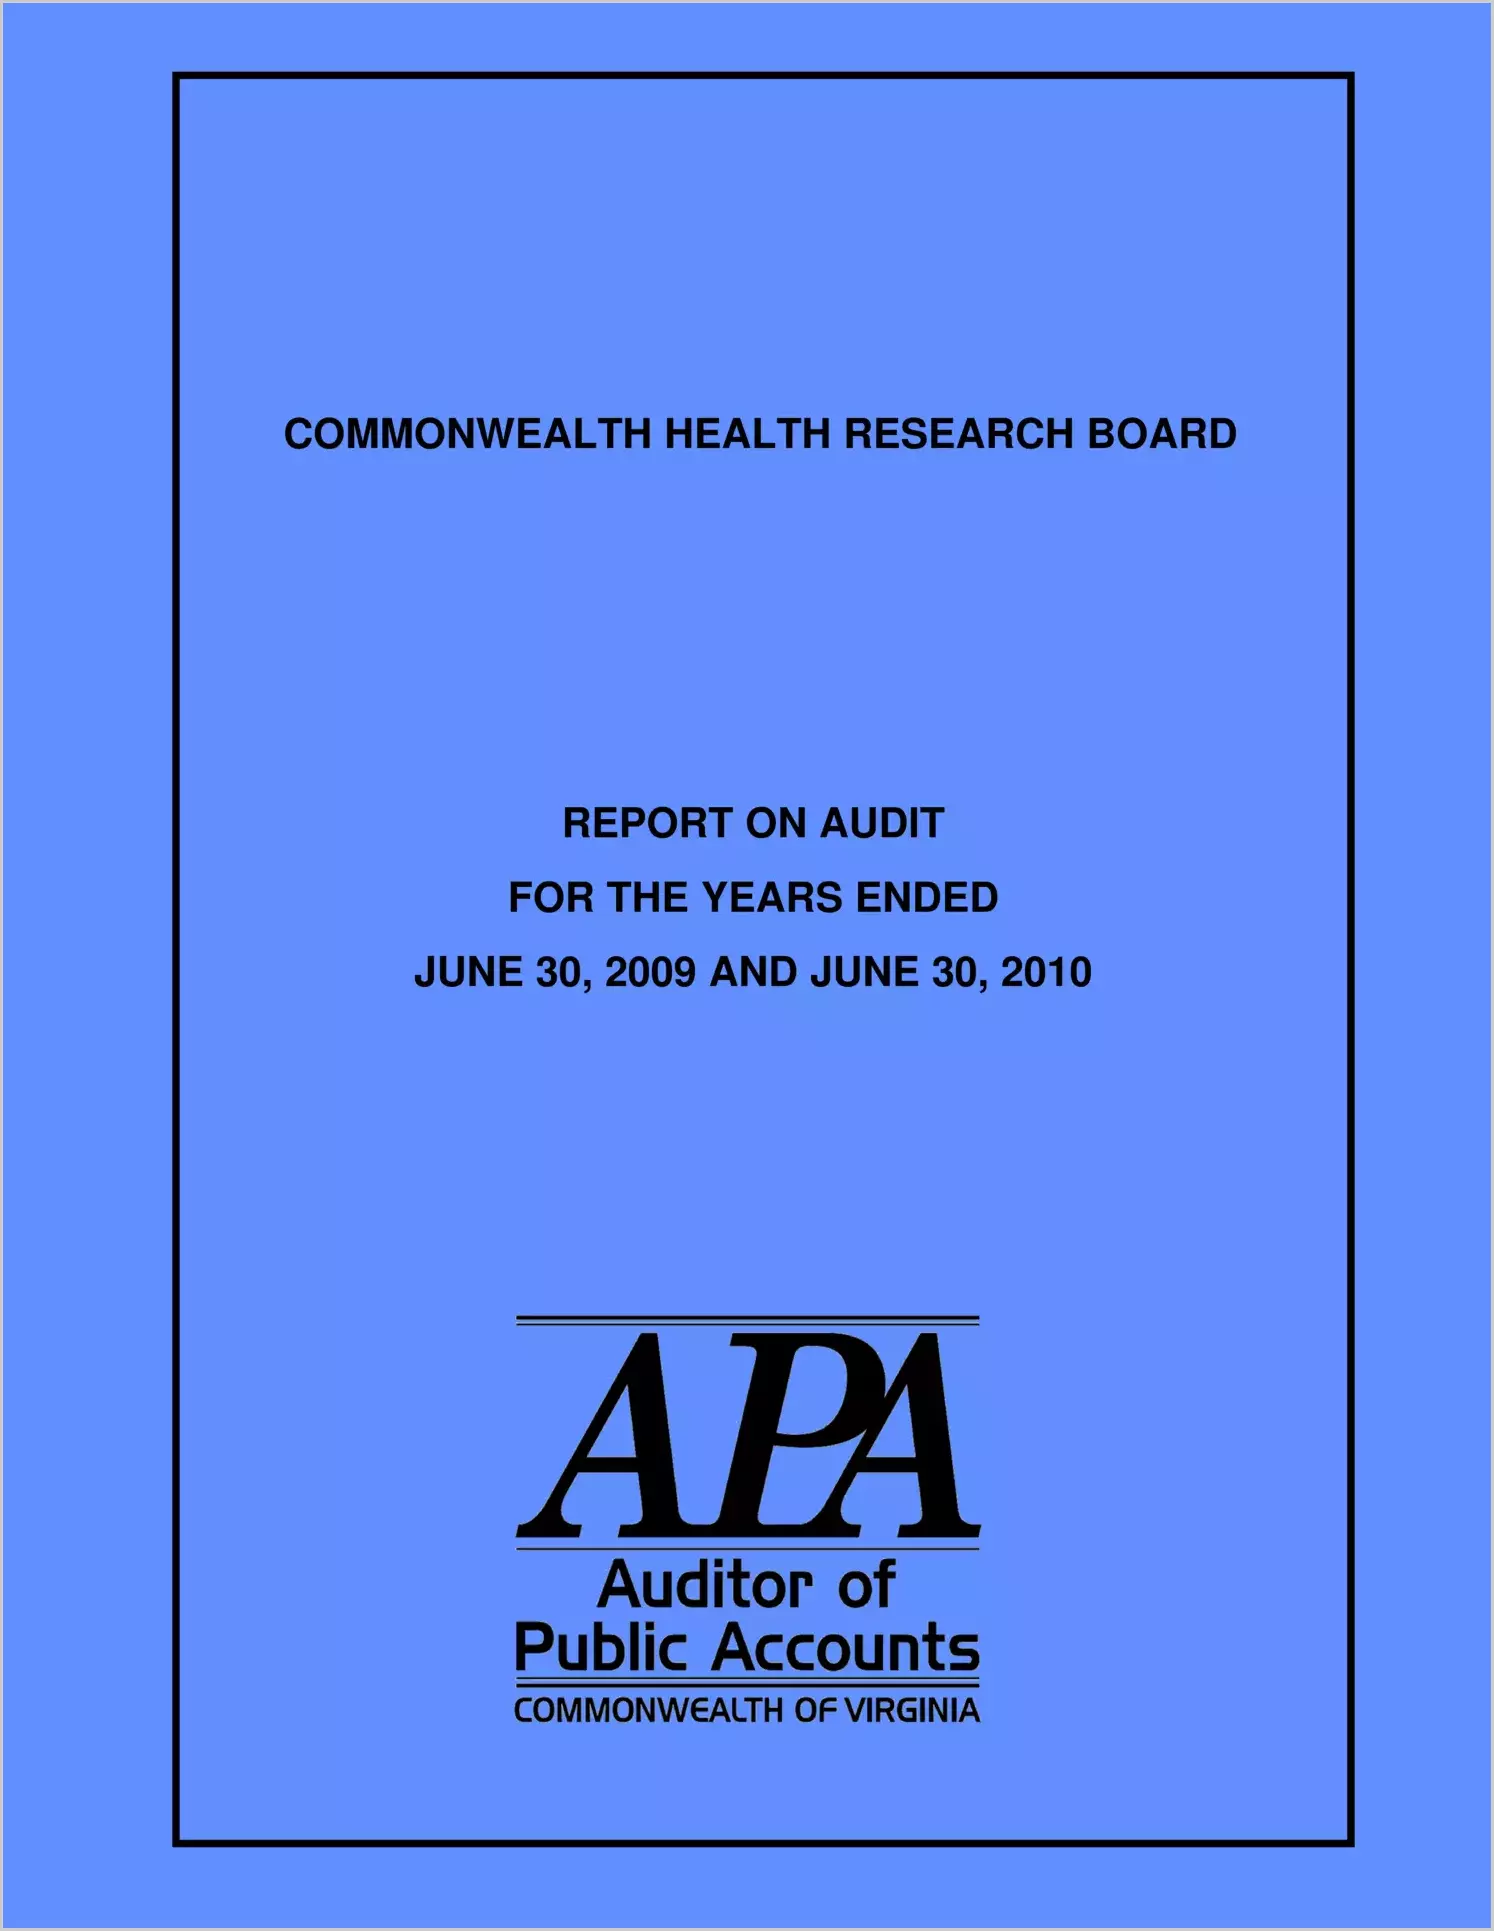 Commonwealth Health Research Board for fiscal years ended June 30, 2009 and June 30, 2010